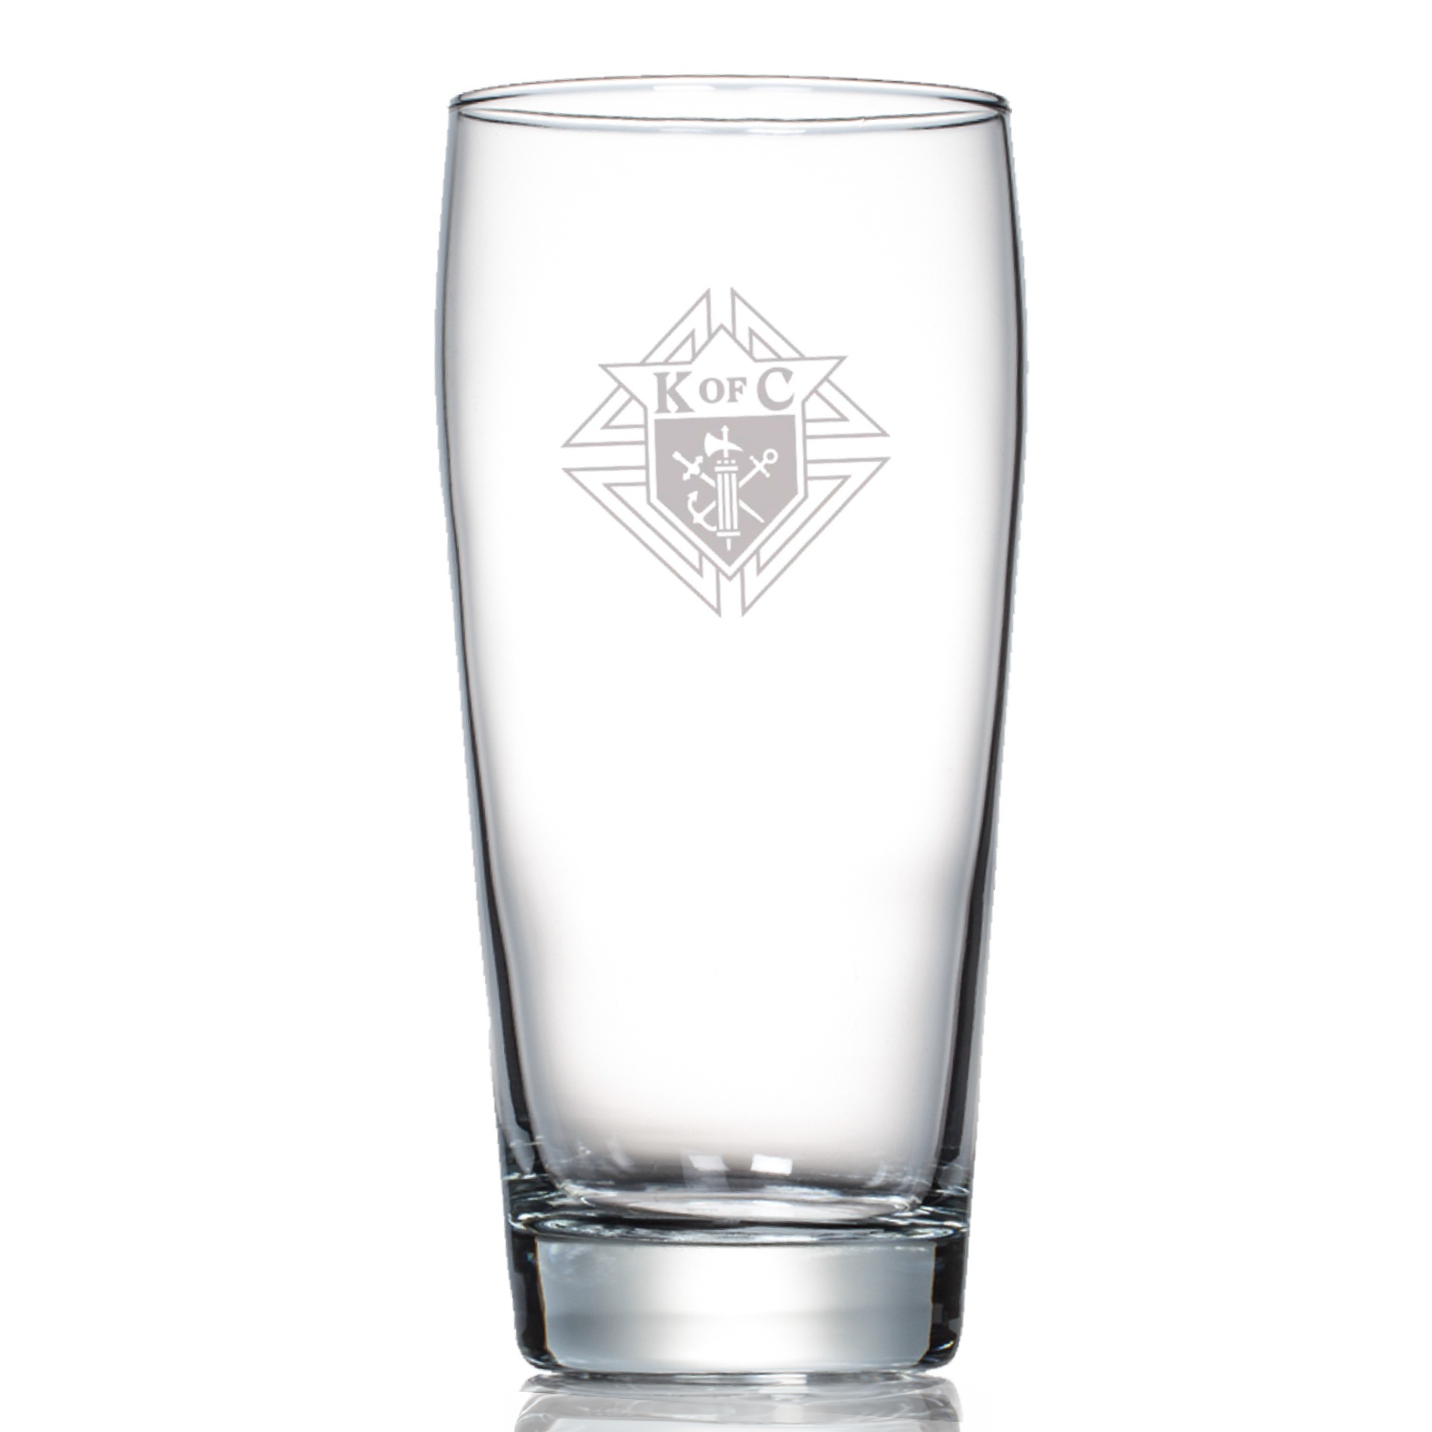 16 oz. Etched Glass - Set of 2